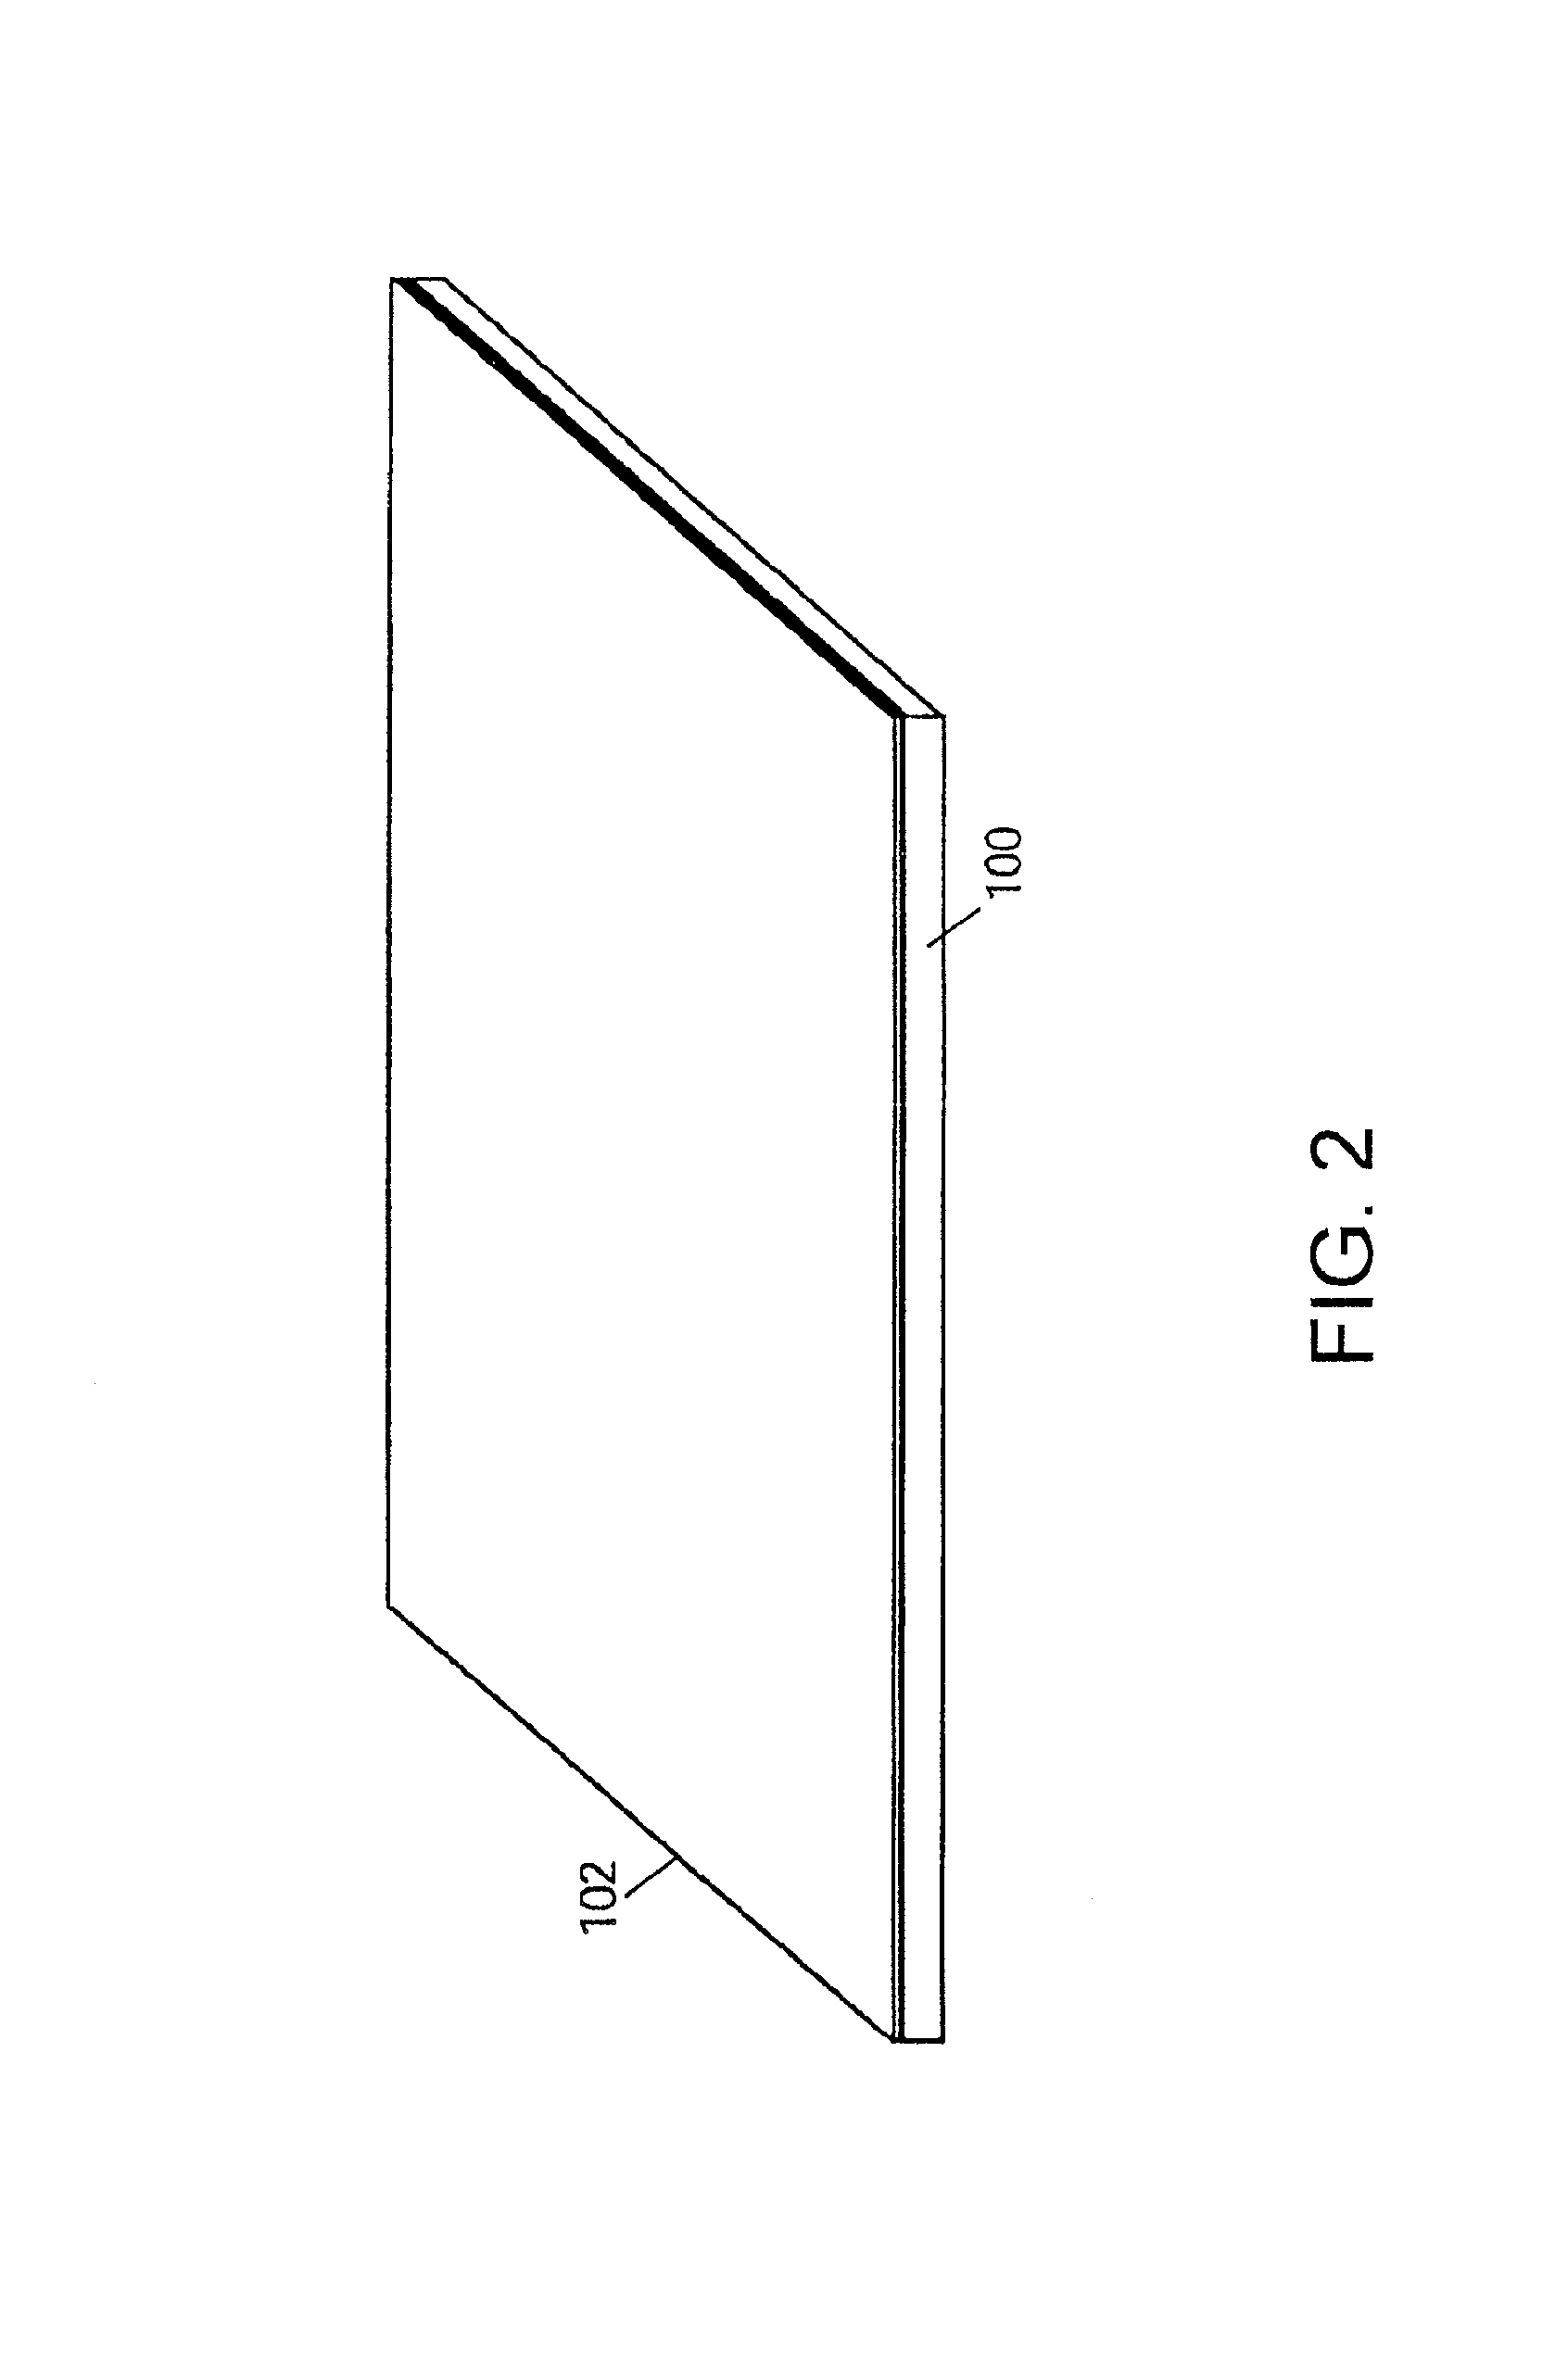 Method for fabricating a structure for a microelectromechanical system (MEMS) device